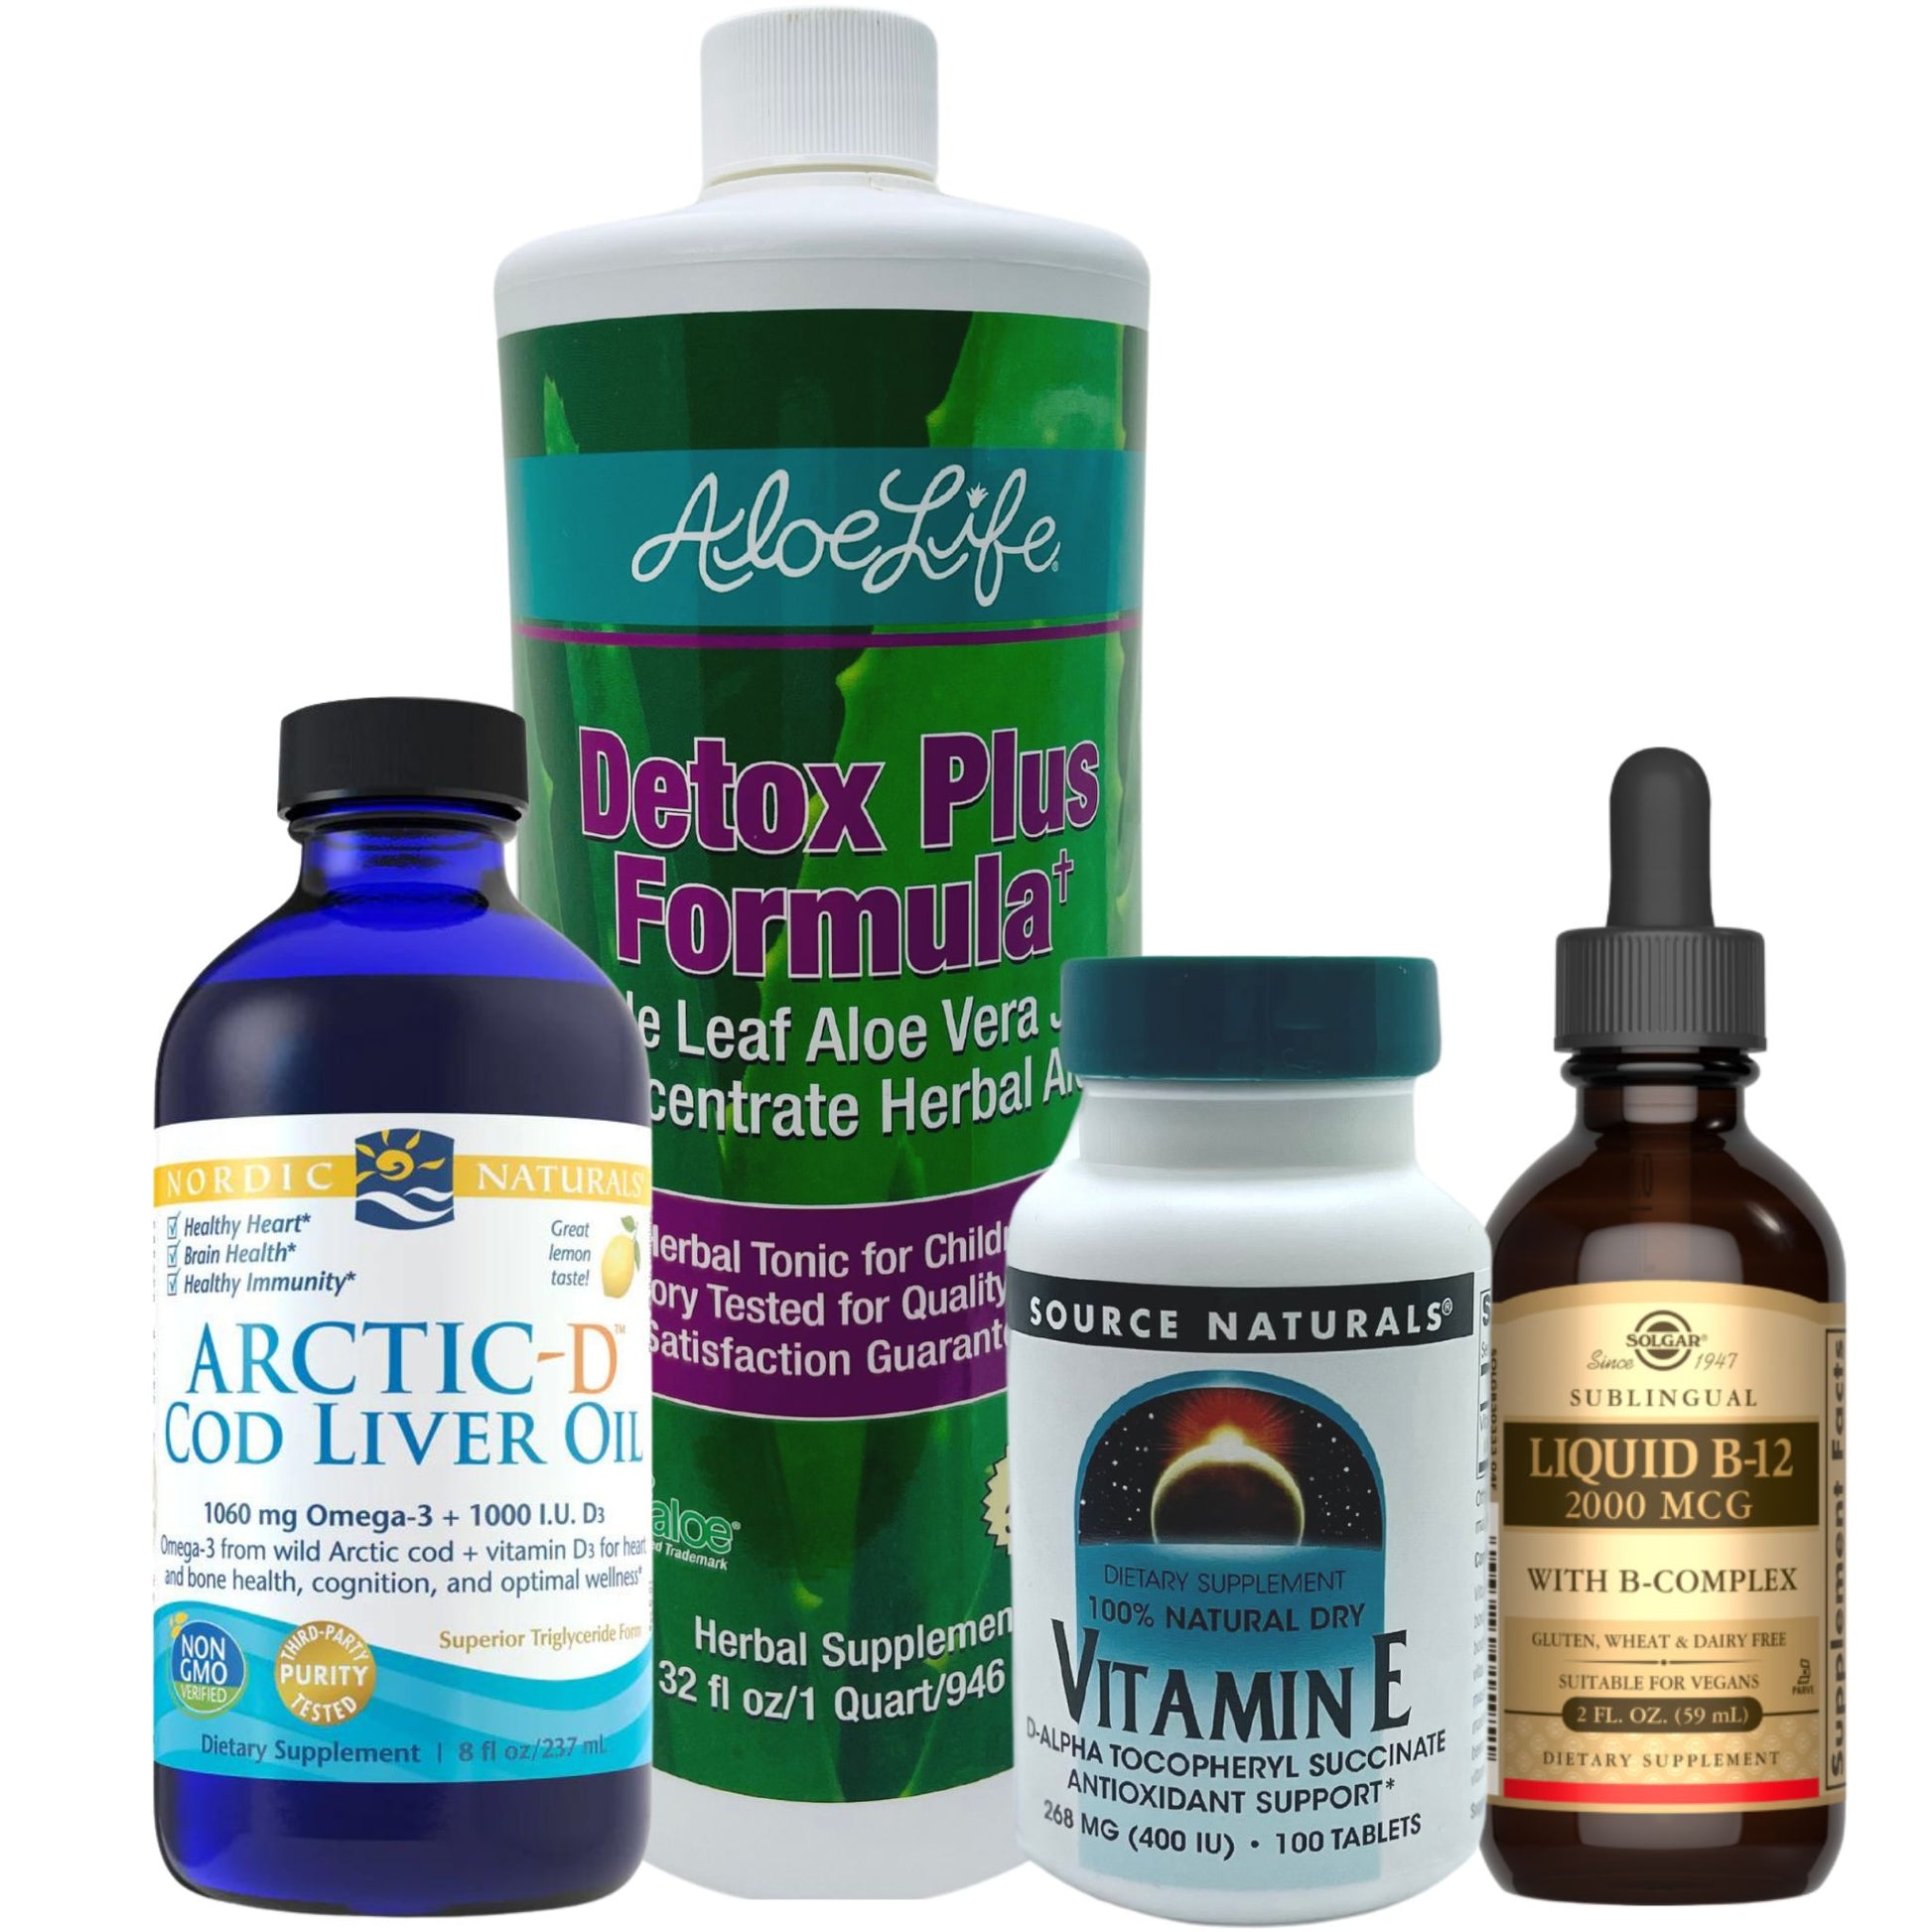 Discounted health and wellness supplements